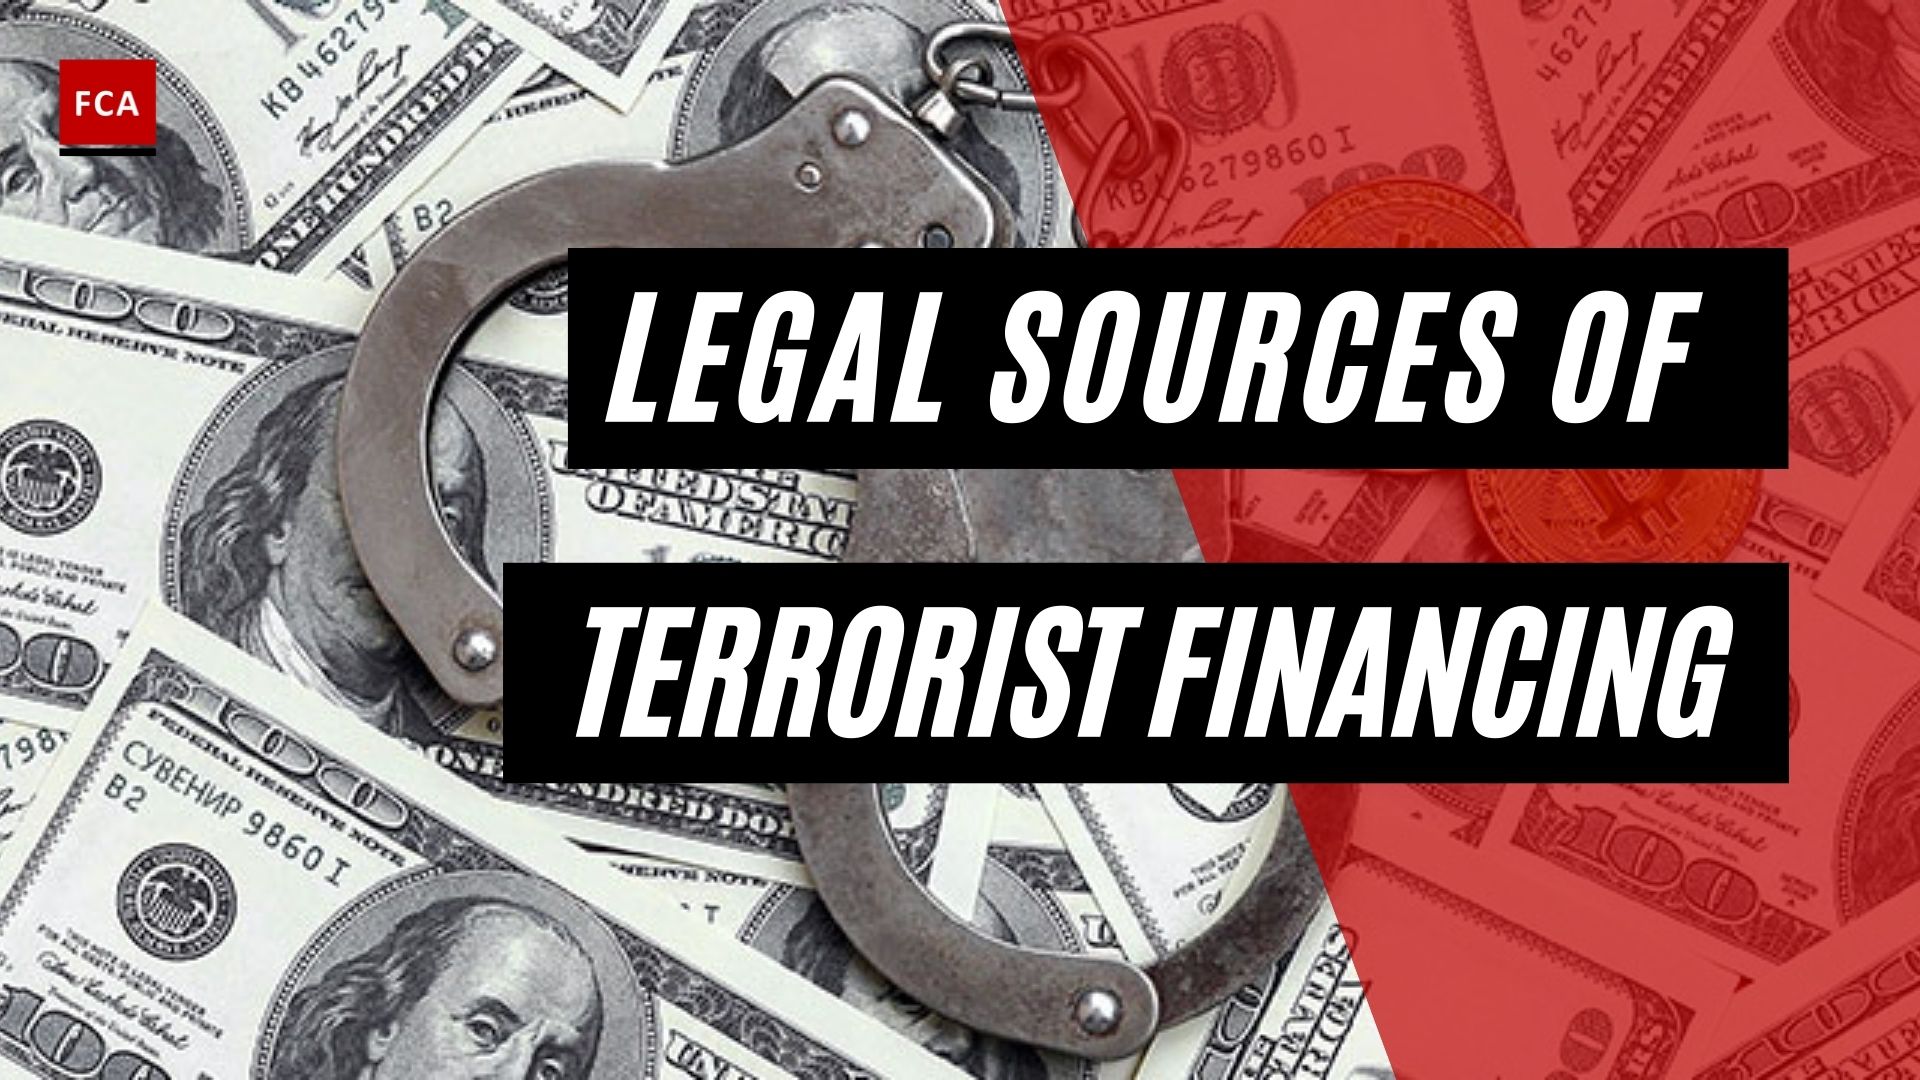 Legal Sources Of Terrorist Financing